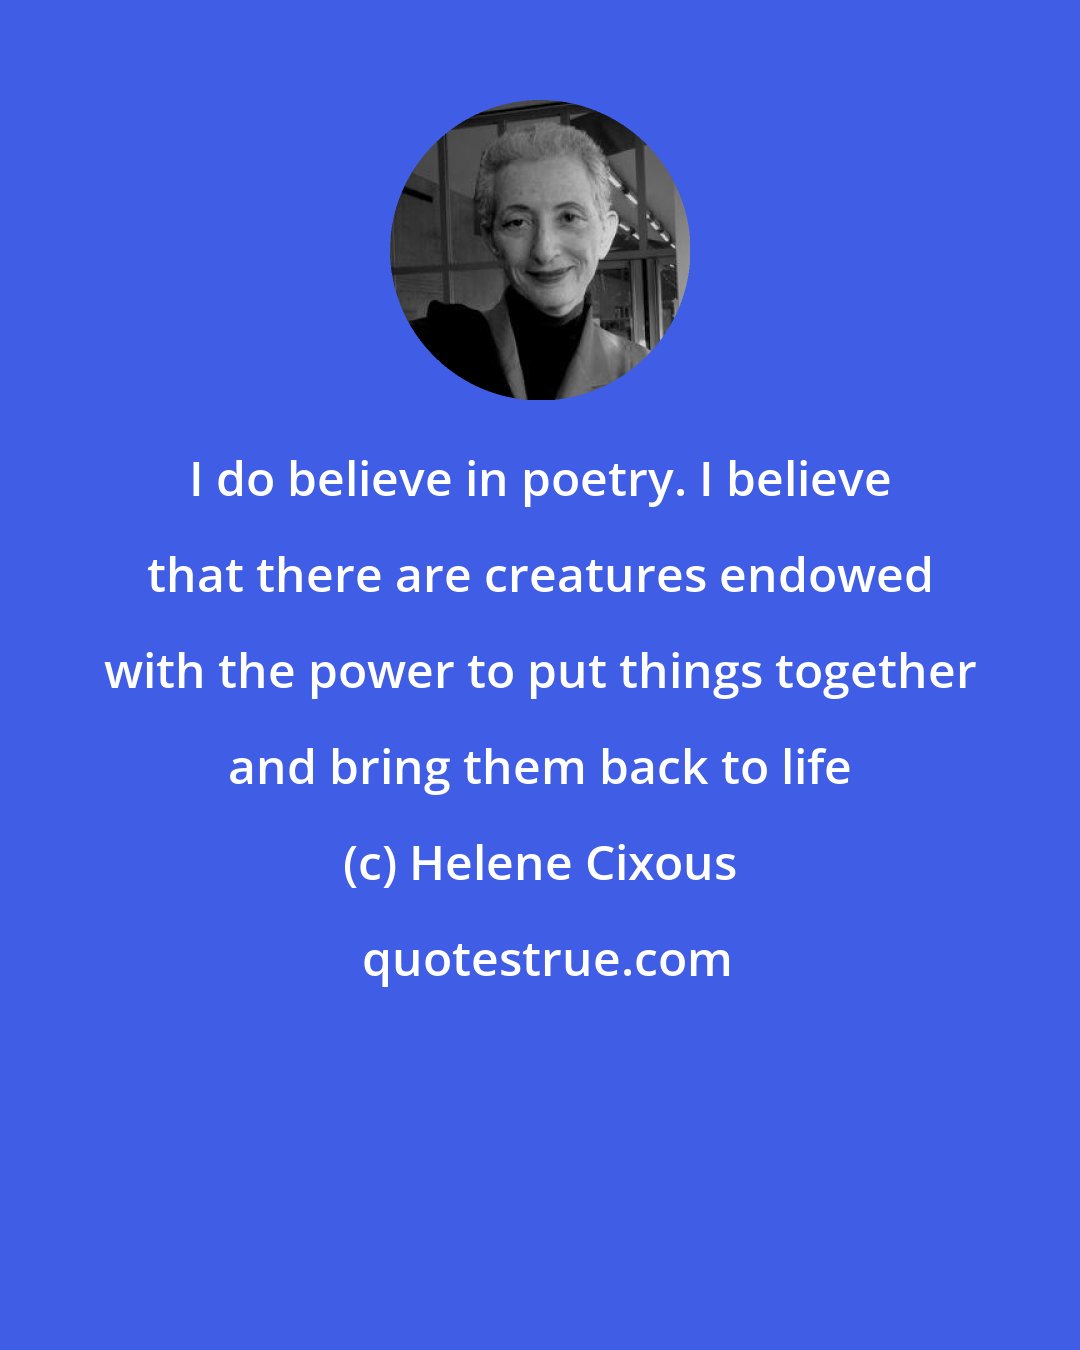 Helene Cixous: I do believe in poetry. I believe that there are creatures endowed with the power to put things together and bring them back to life